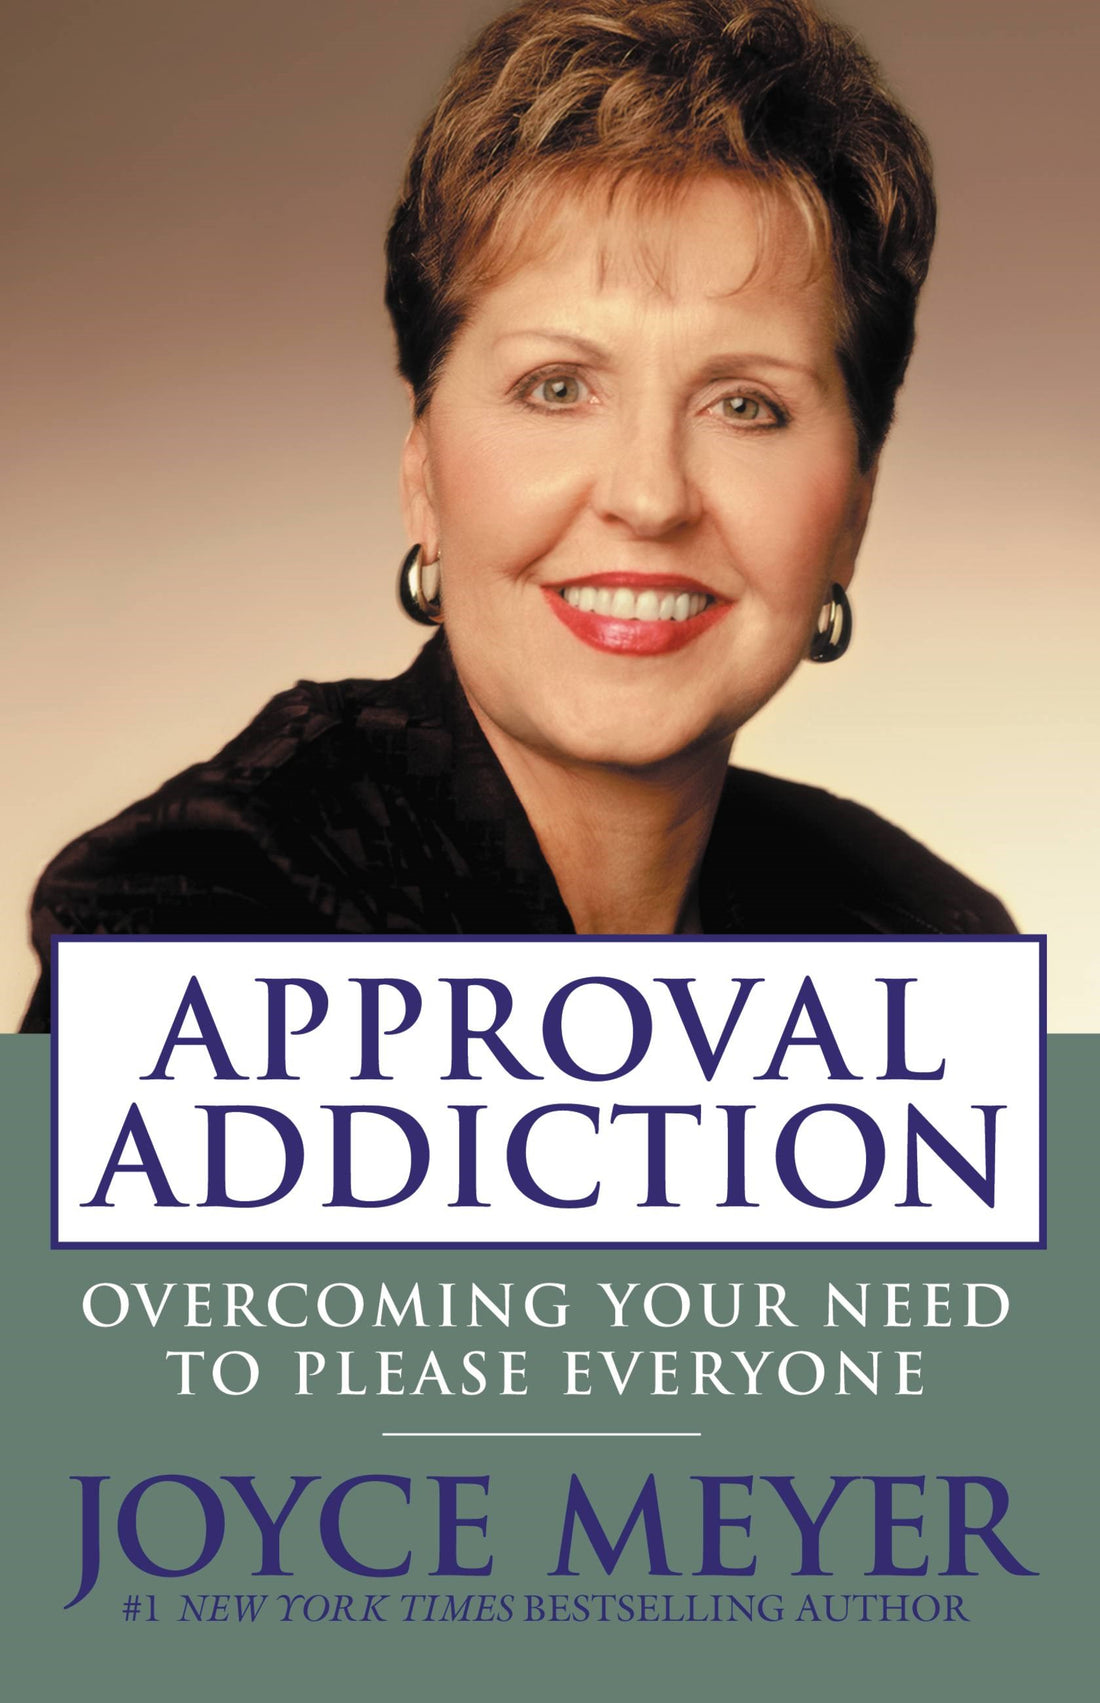 Seed of Abraham Christian Bookstore - Joyce Meyer - Approval Addiction - OVERCOMING YOUR NEED TO PLEASE EVERYONE